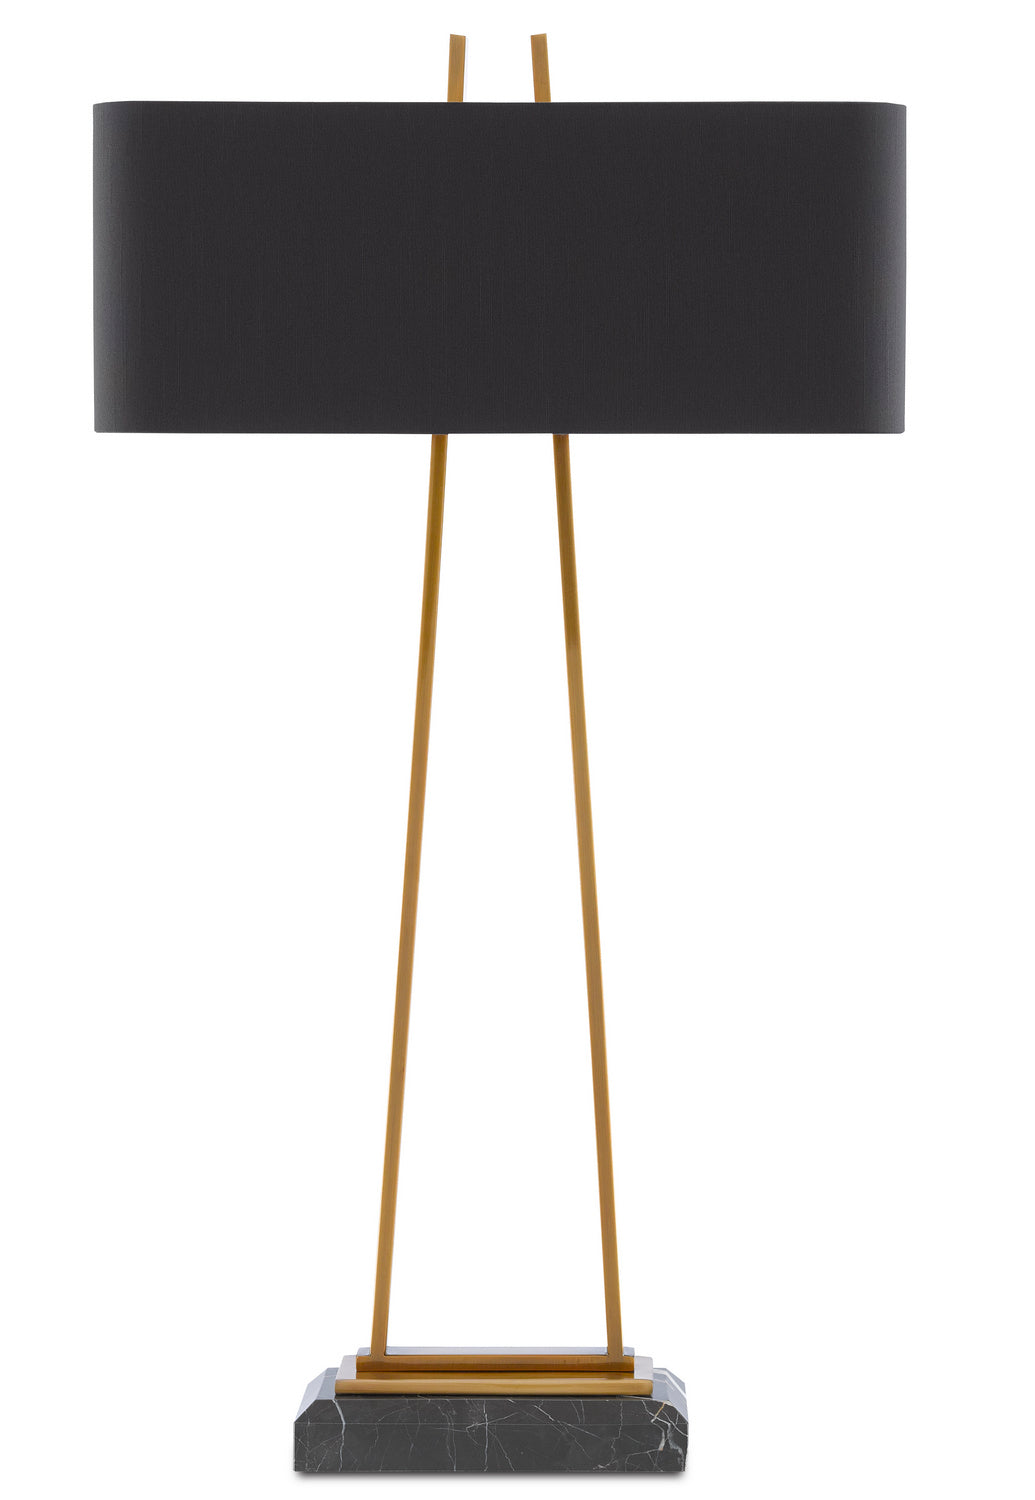 Two Light Table Lamp from the Adorn collection in Antique Brass/Black finish